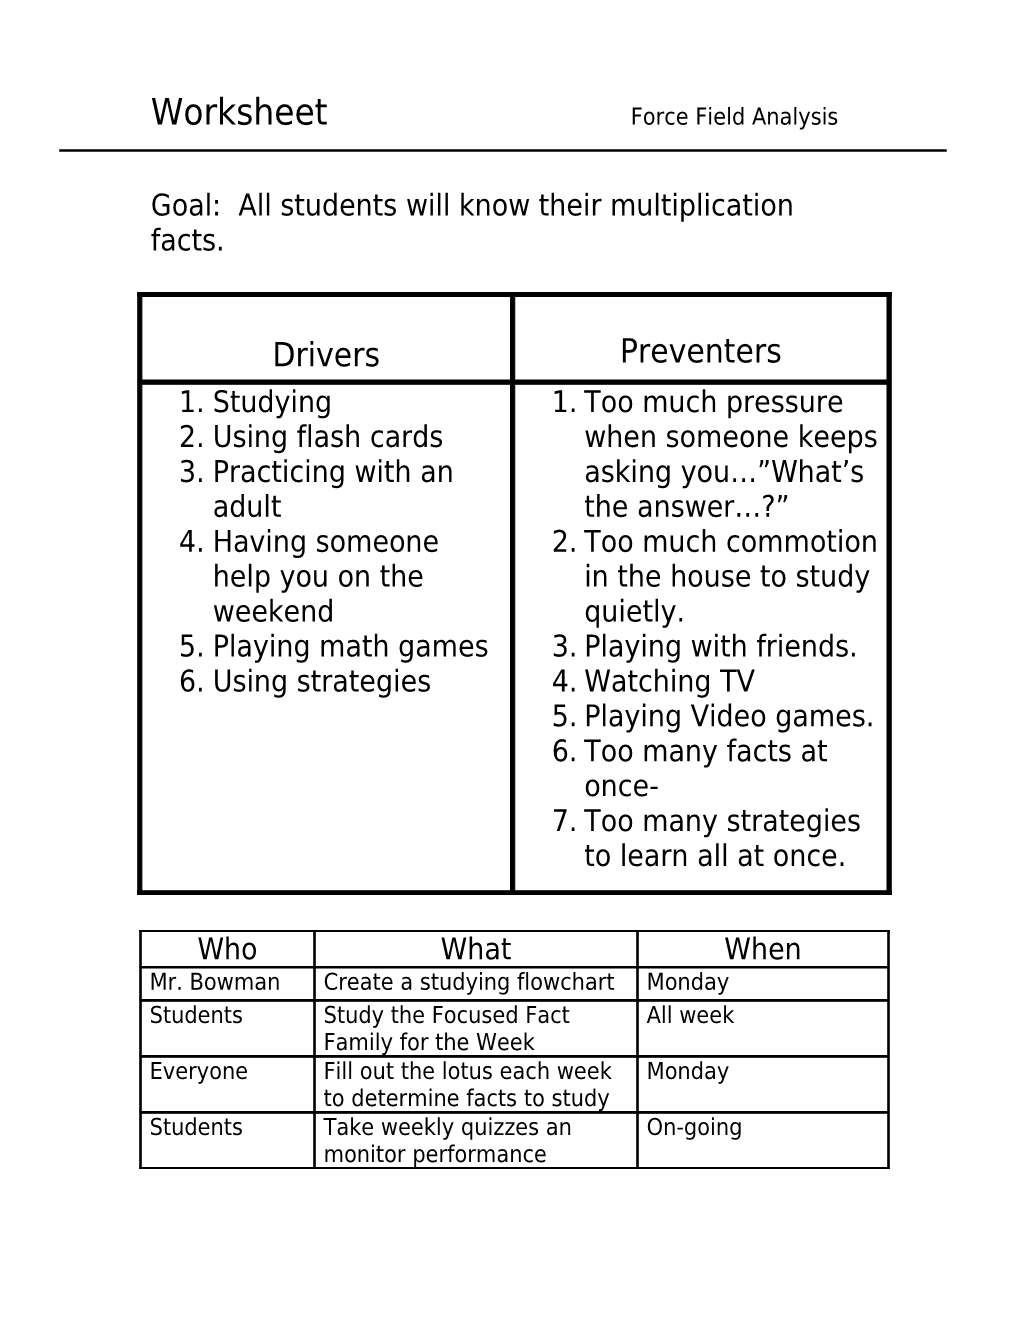 Goal: All Students Will Know Their Multiplication Facts